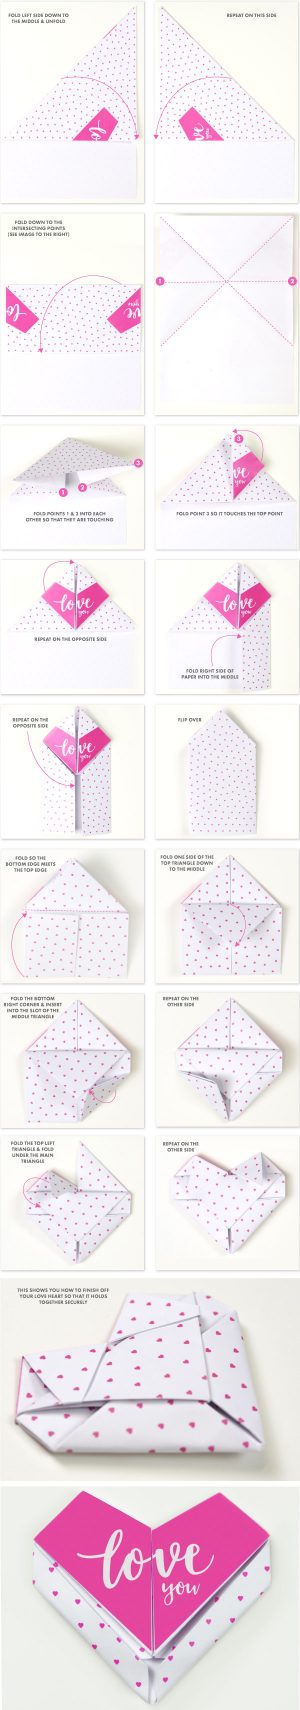 How To Make Small Origami Hearts Free Love Heart Origami Tutorial For Valentines Day Bright Star Kids